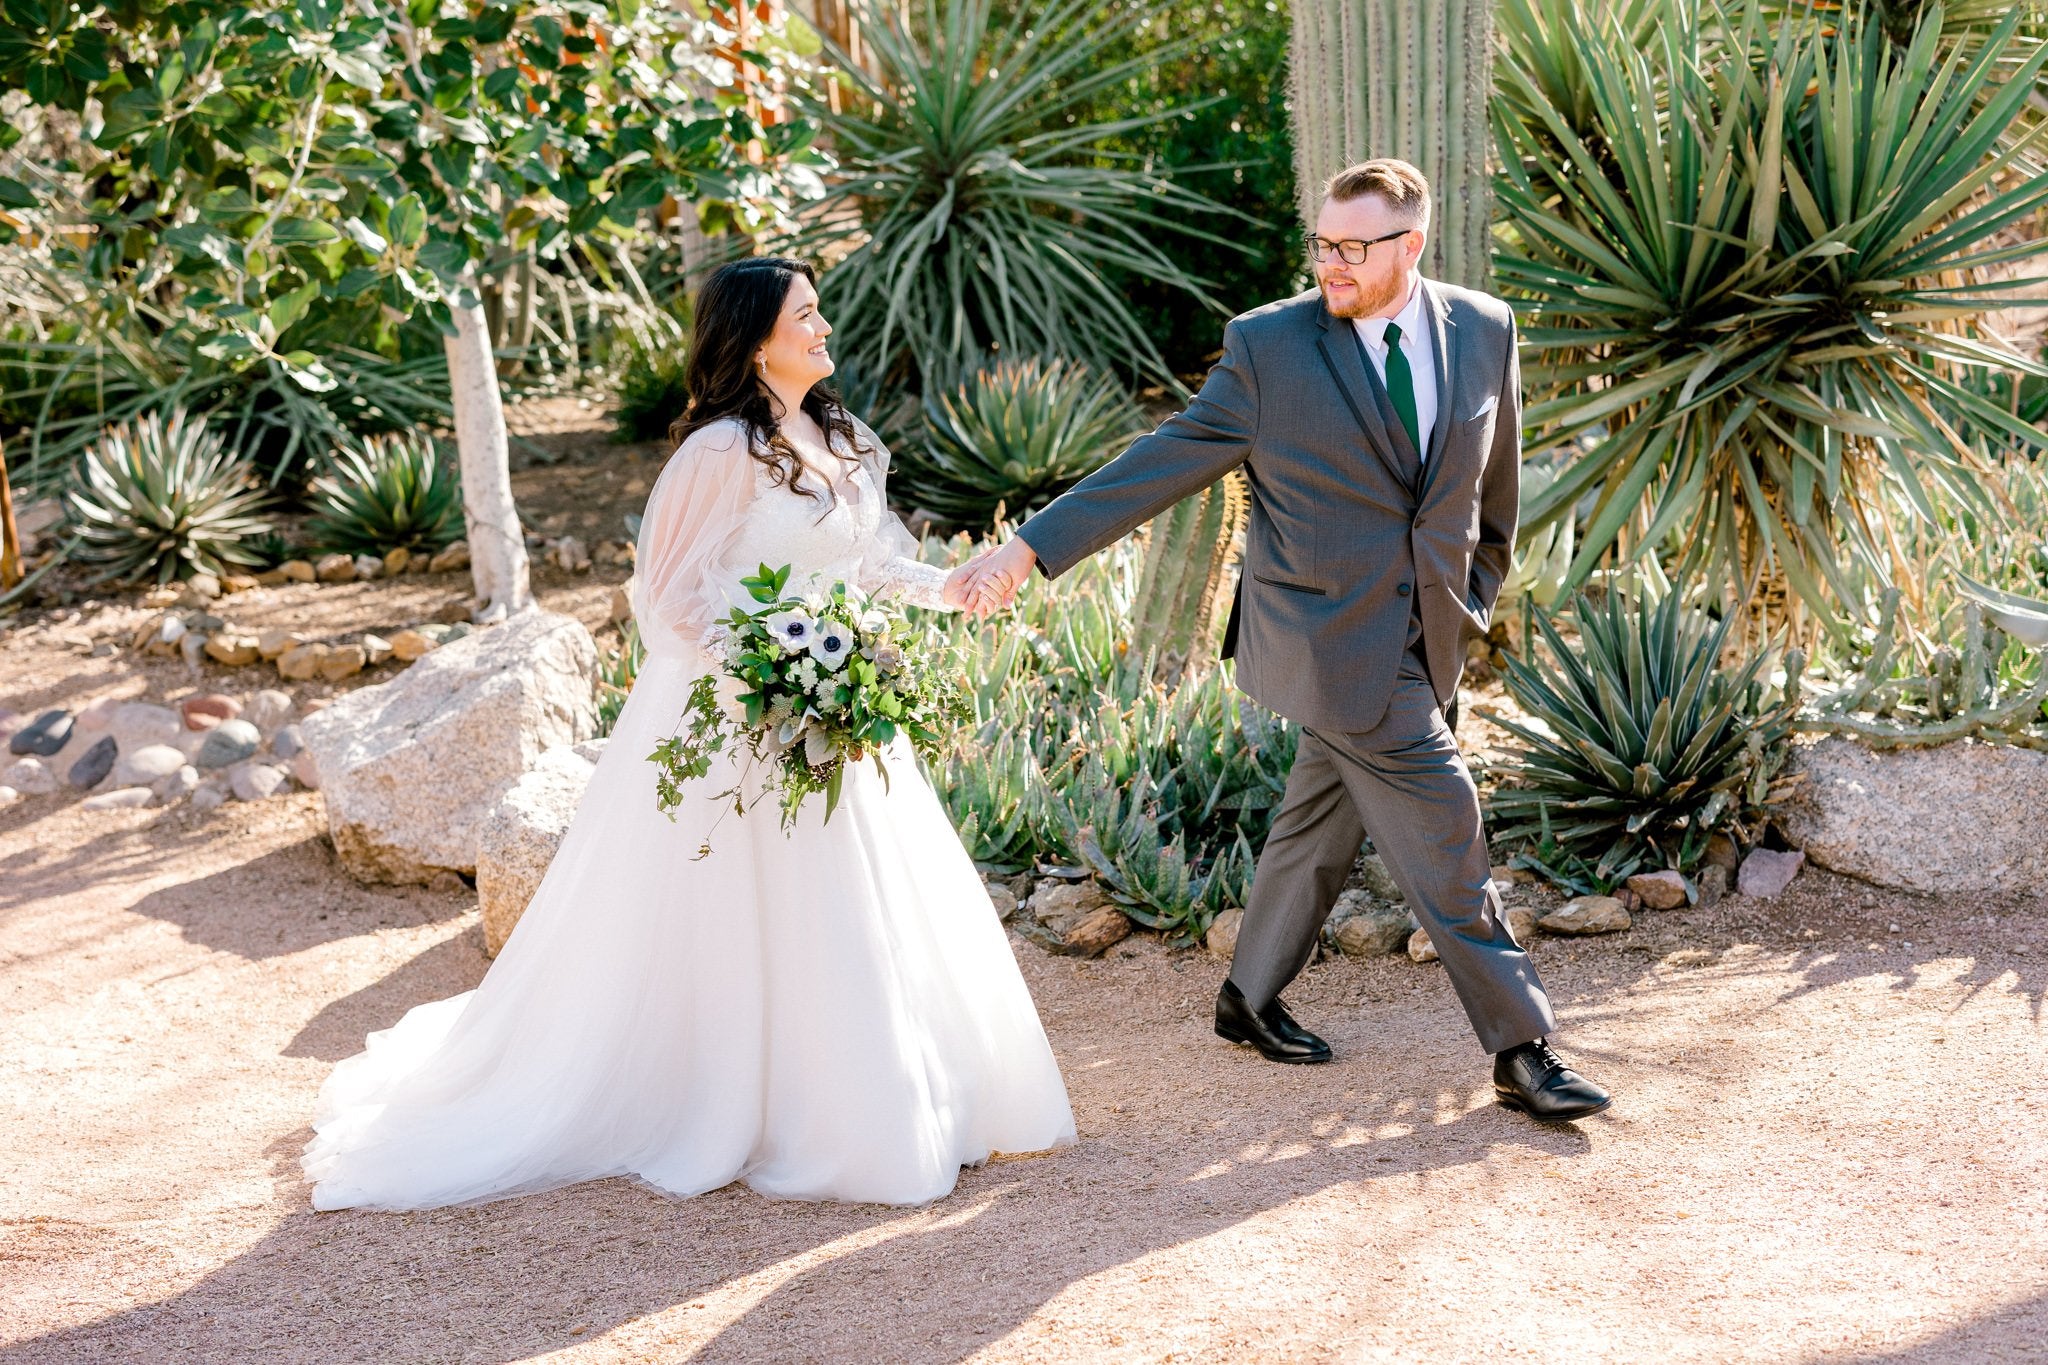 Bride and groom walking through the desert holding large bridal bouquet of flowers and greenery